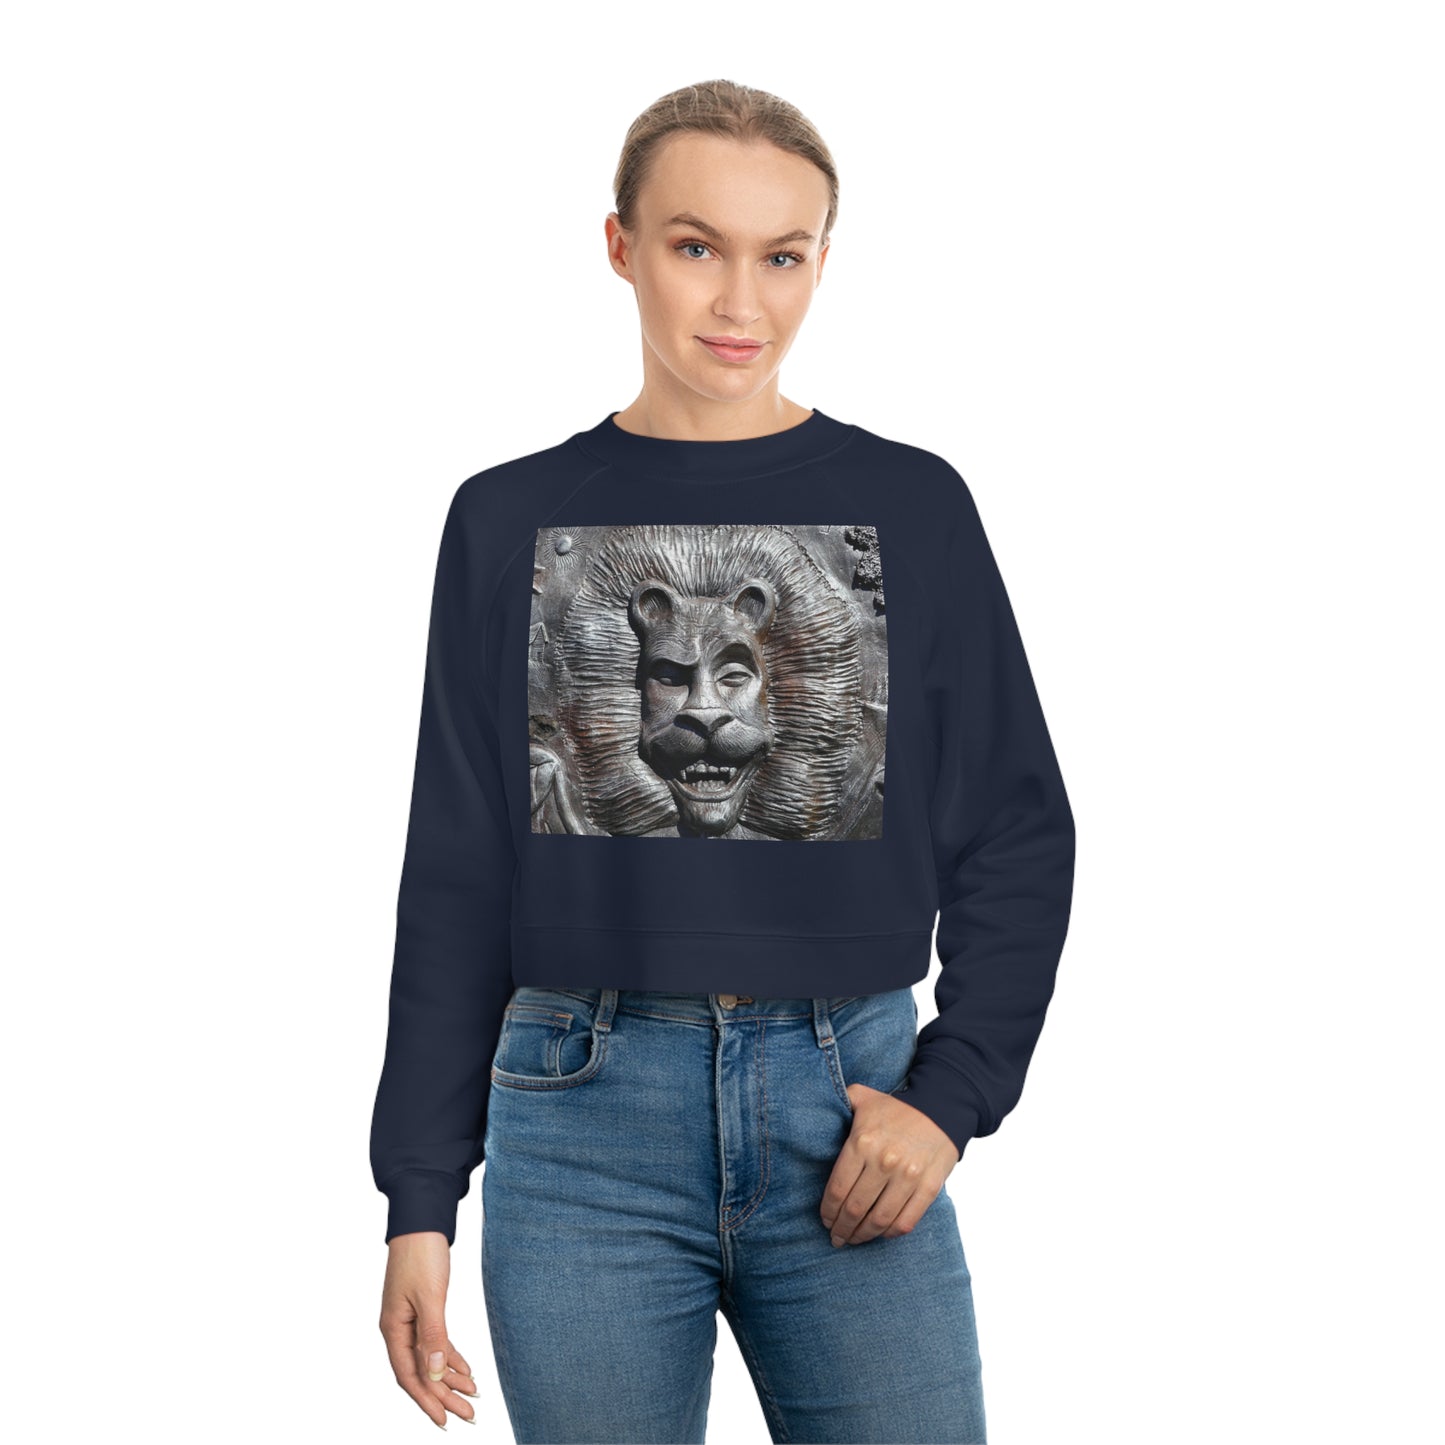 Lion's Friends Forever - Women's Cropped Fleece Pullover - Fry1Productions